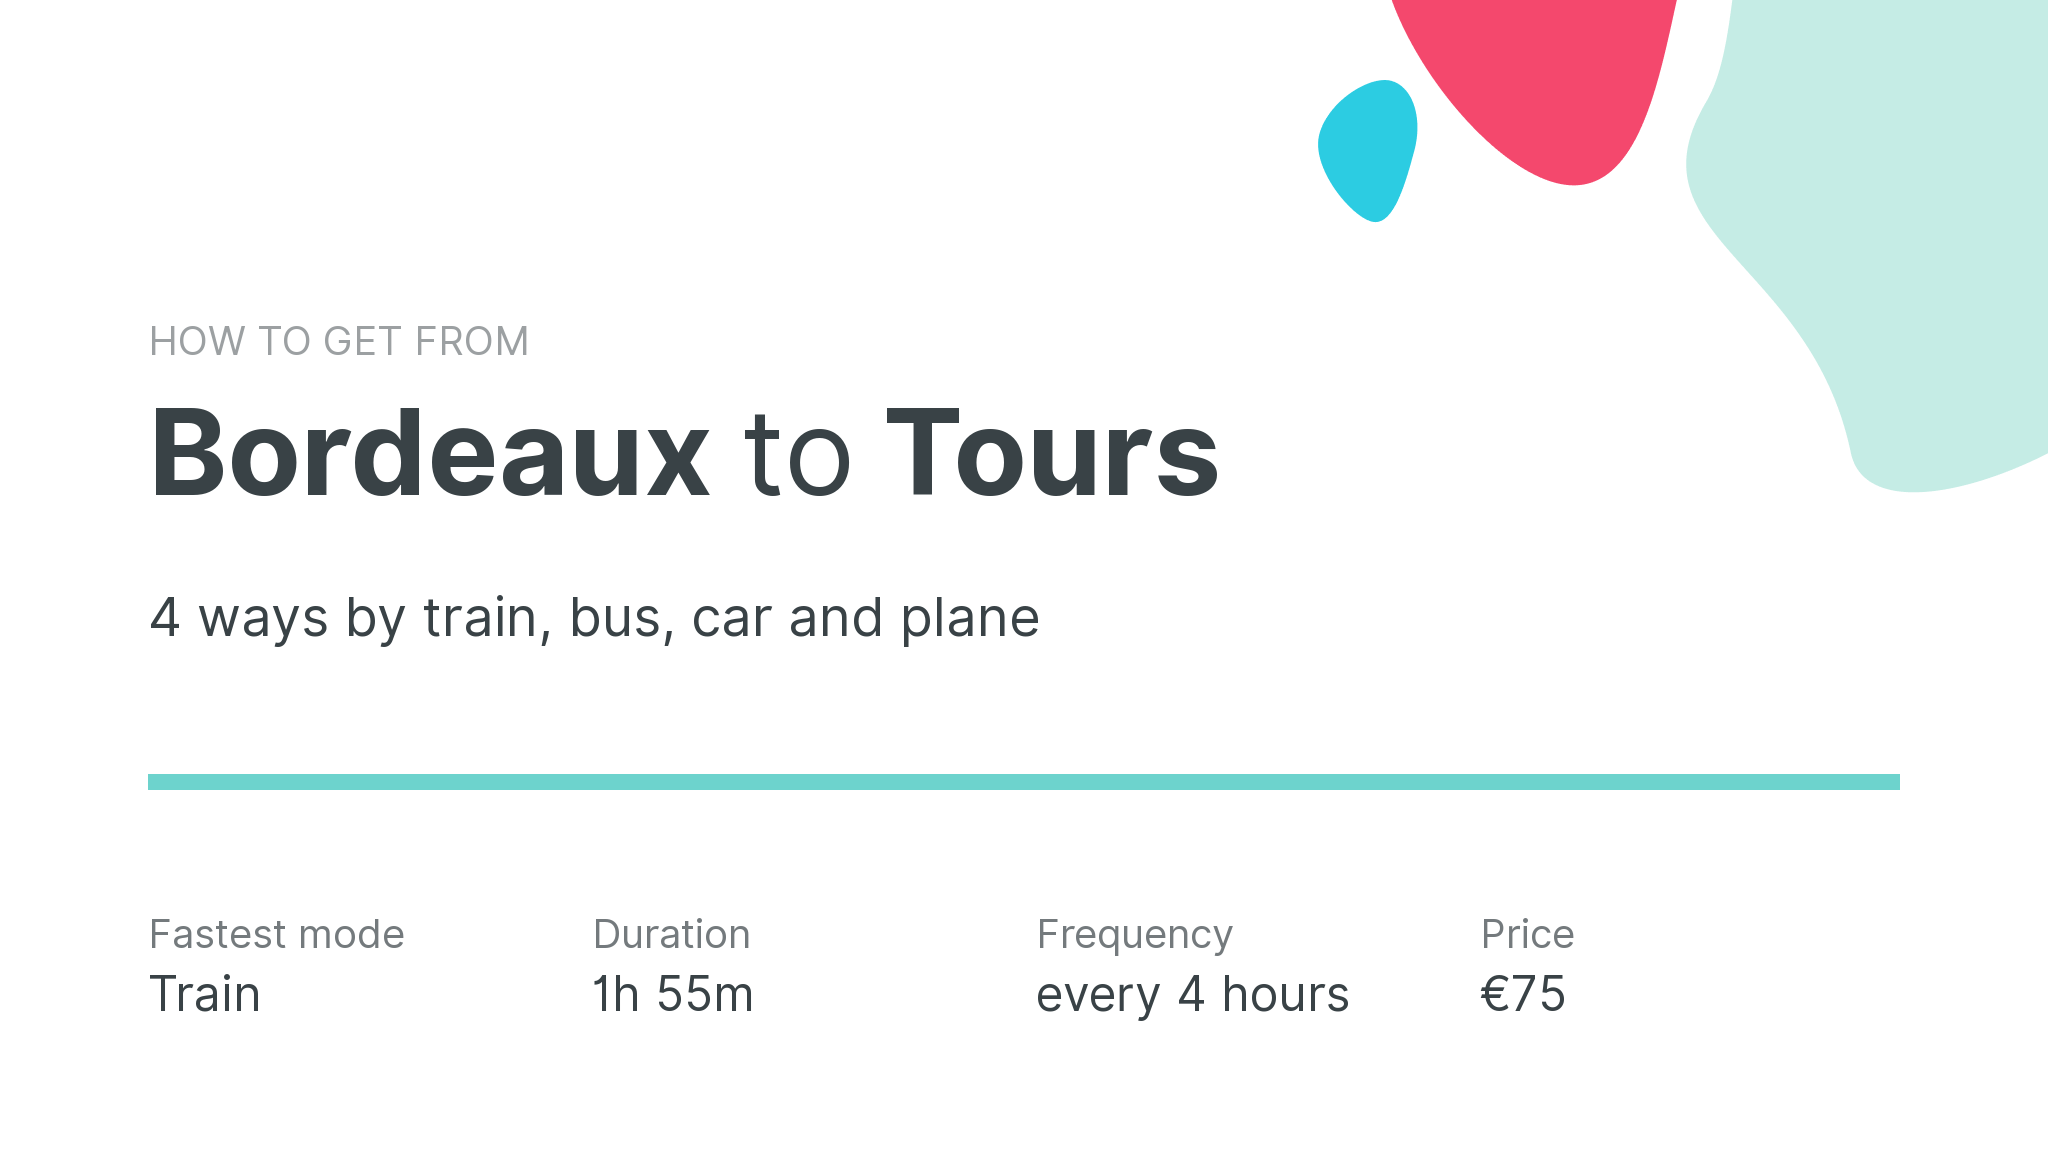 How do I get from Bordeaux to Tours